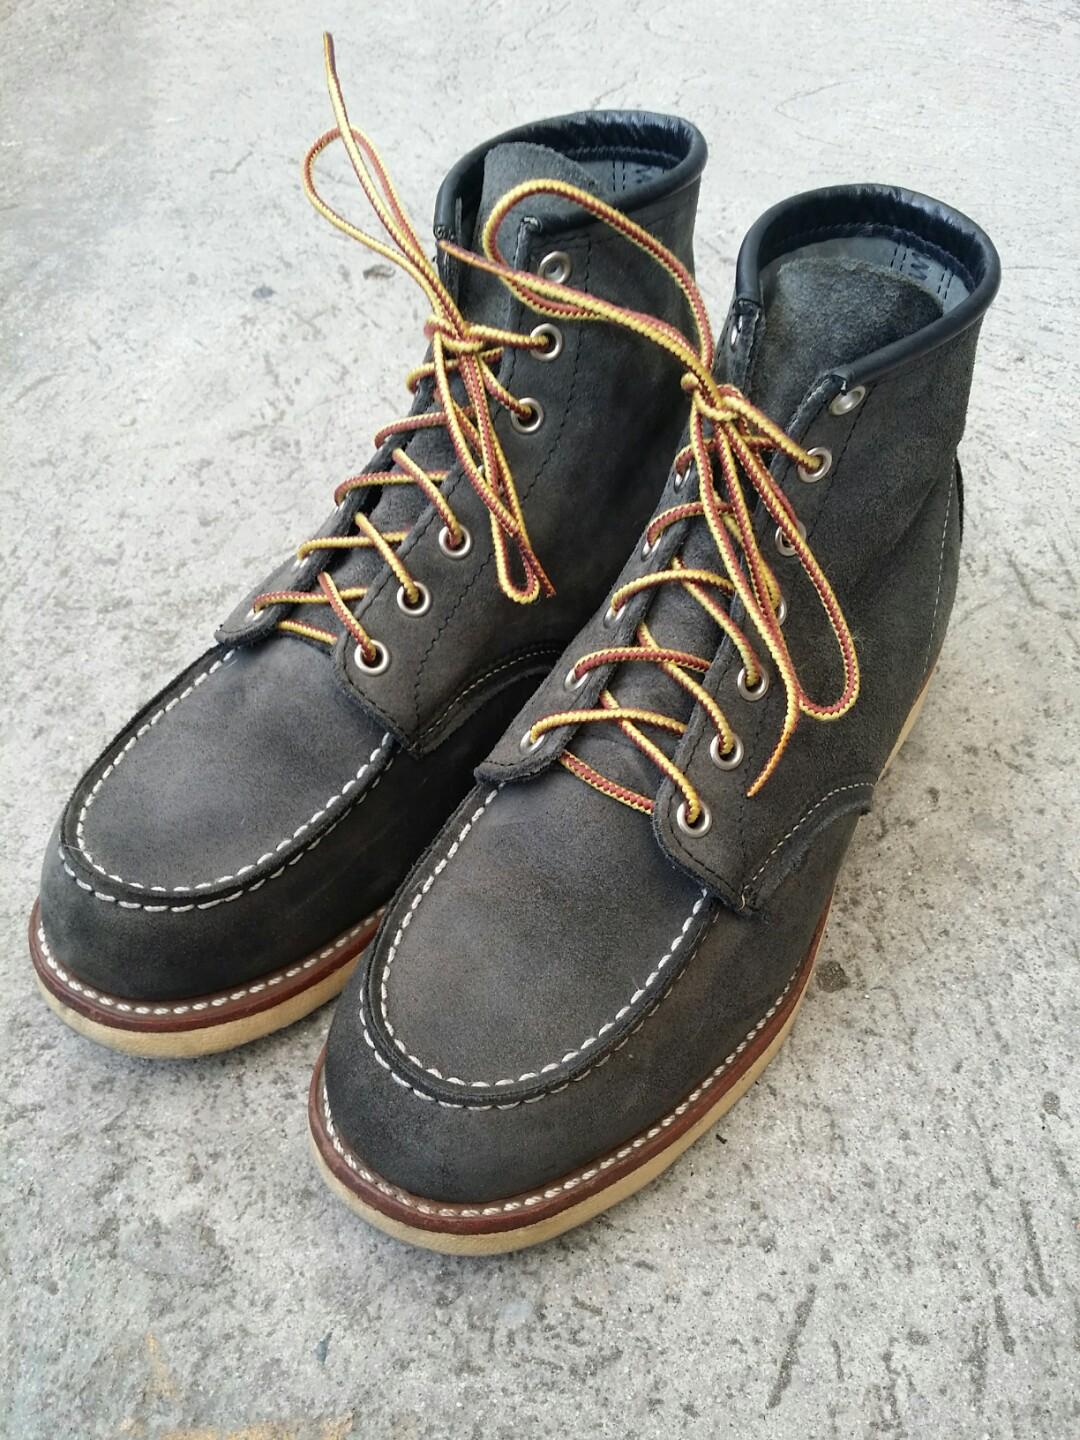 red wing boots 885